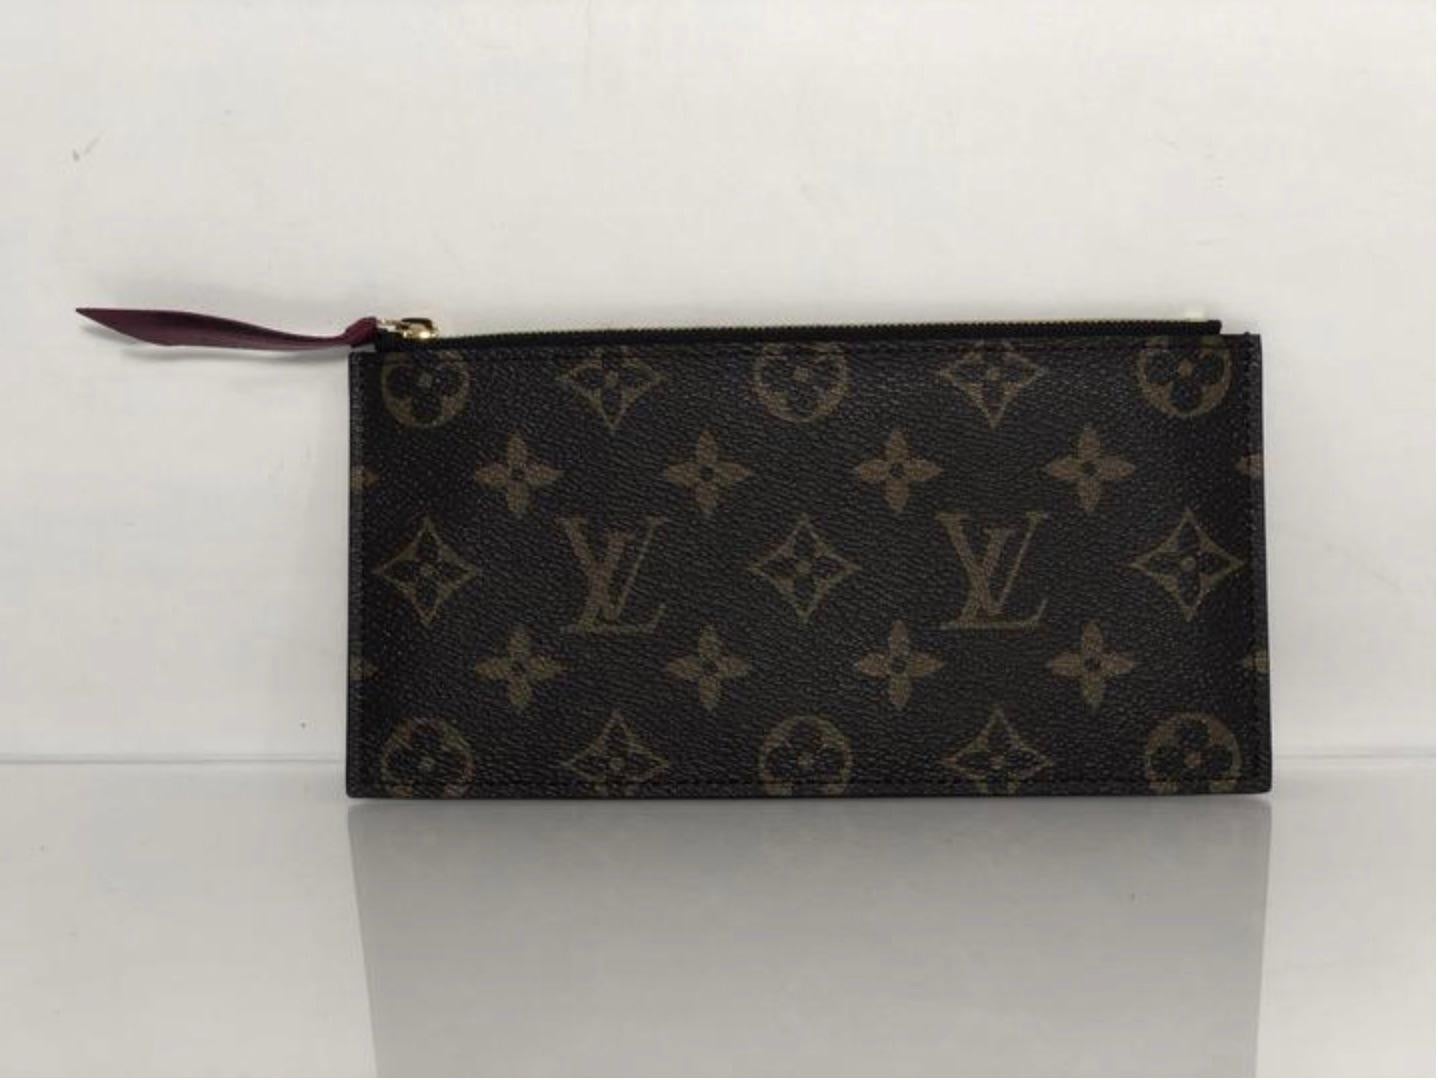 MODEL - Louis Vuitton Monogram Pochette Felicie Zip Clutch Insert

CONDITION - Exceptional! No visibile signs of wear.

SKU - 2868

ORIGINAL/CURRENT RETAIL PRICE - 475 + tax

DATE/SERIAL CODE - 

ORIGIN - France

PRODUCTION - 2016

DIMENSIONS - L8.4